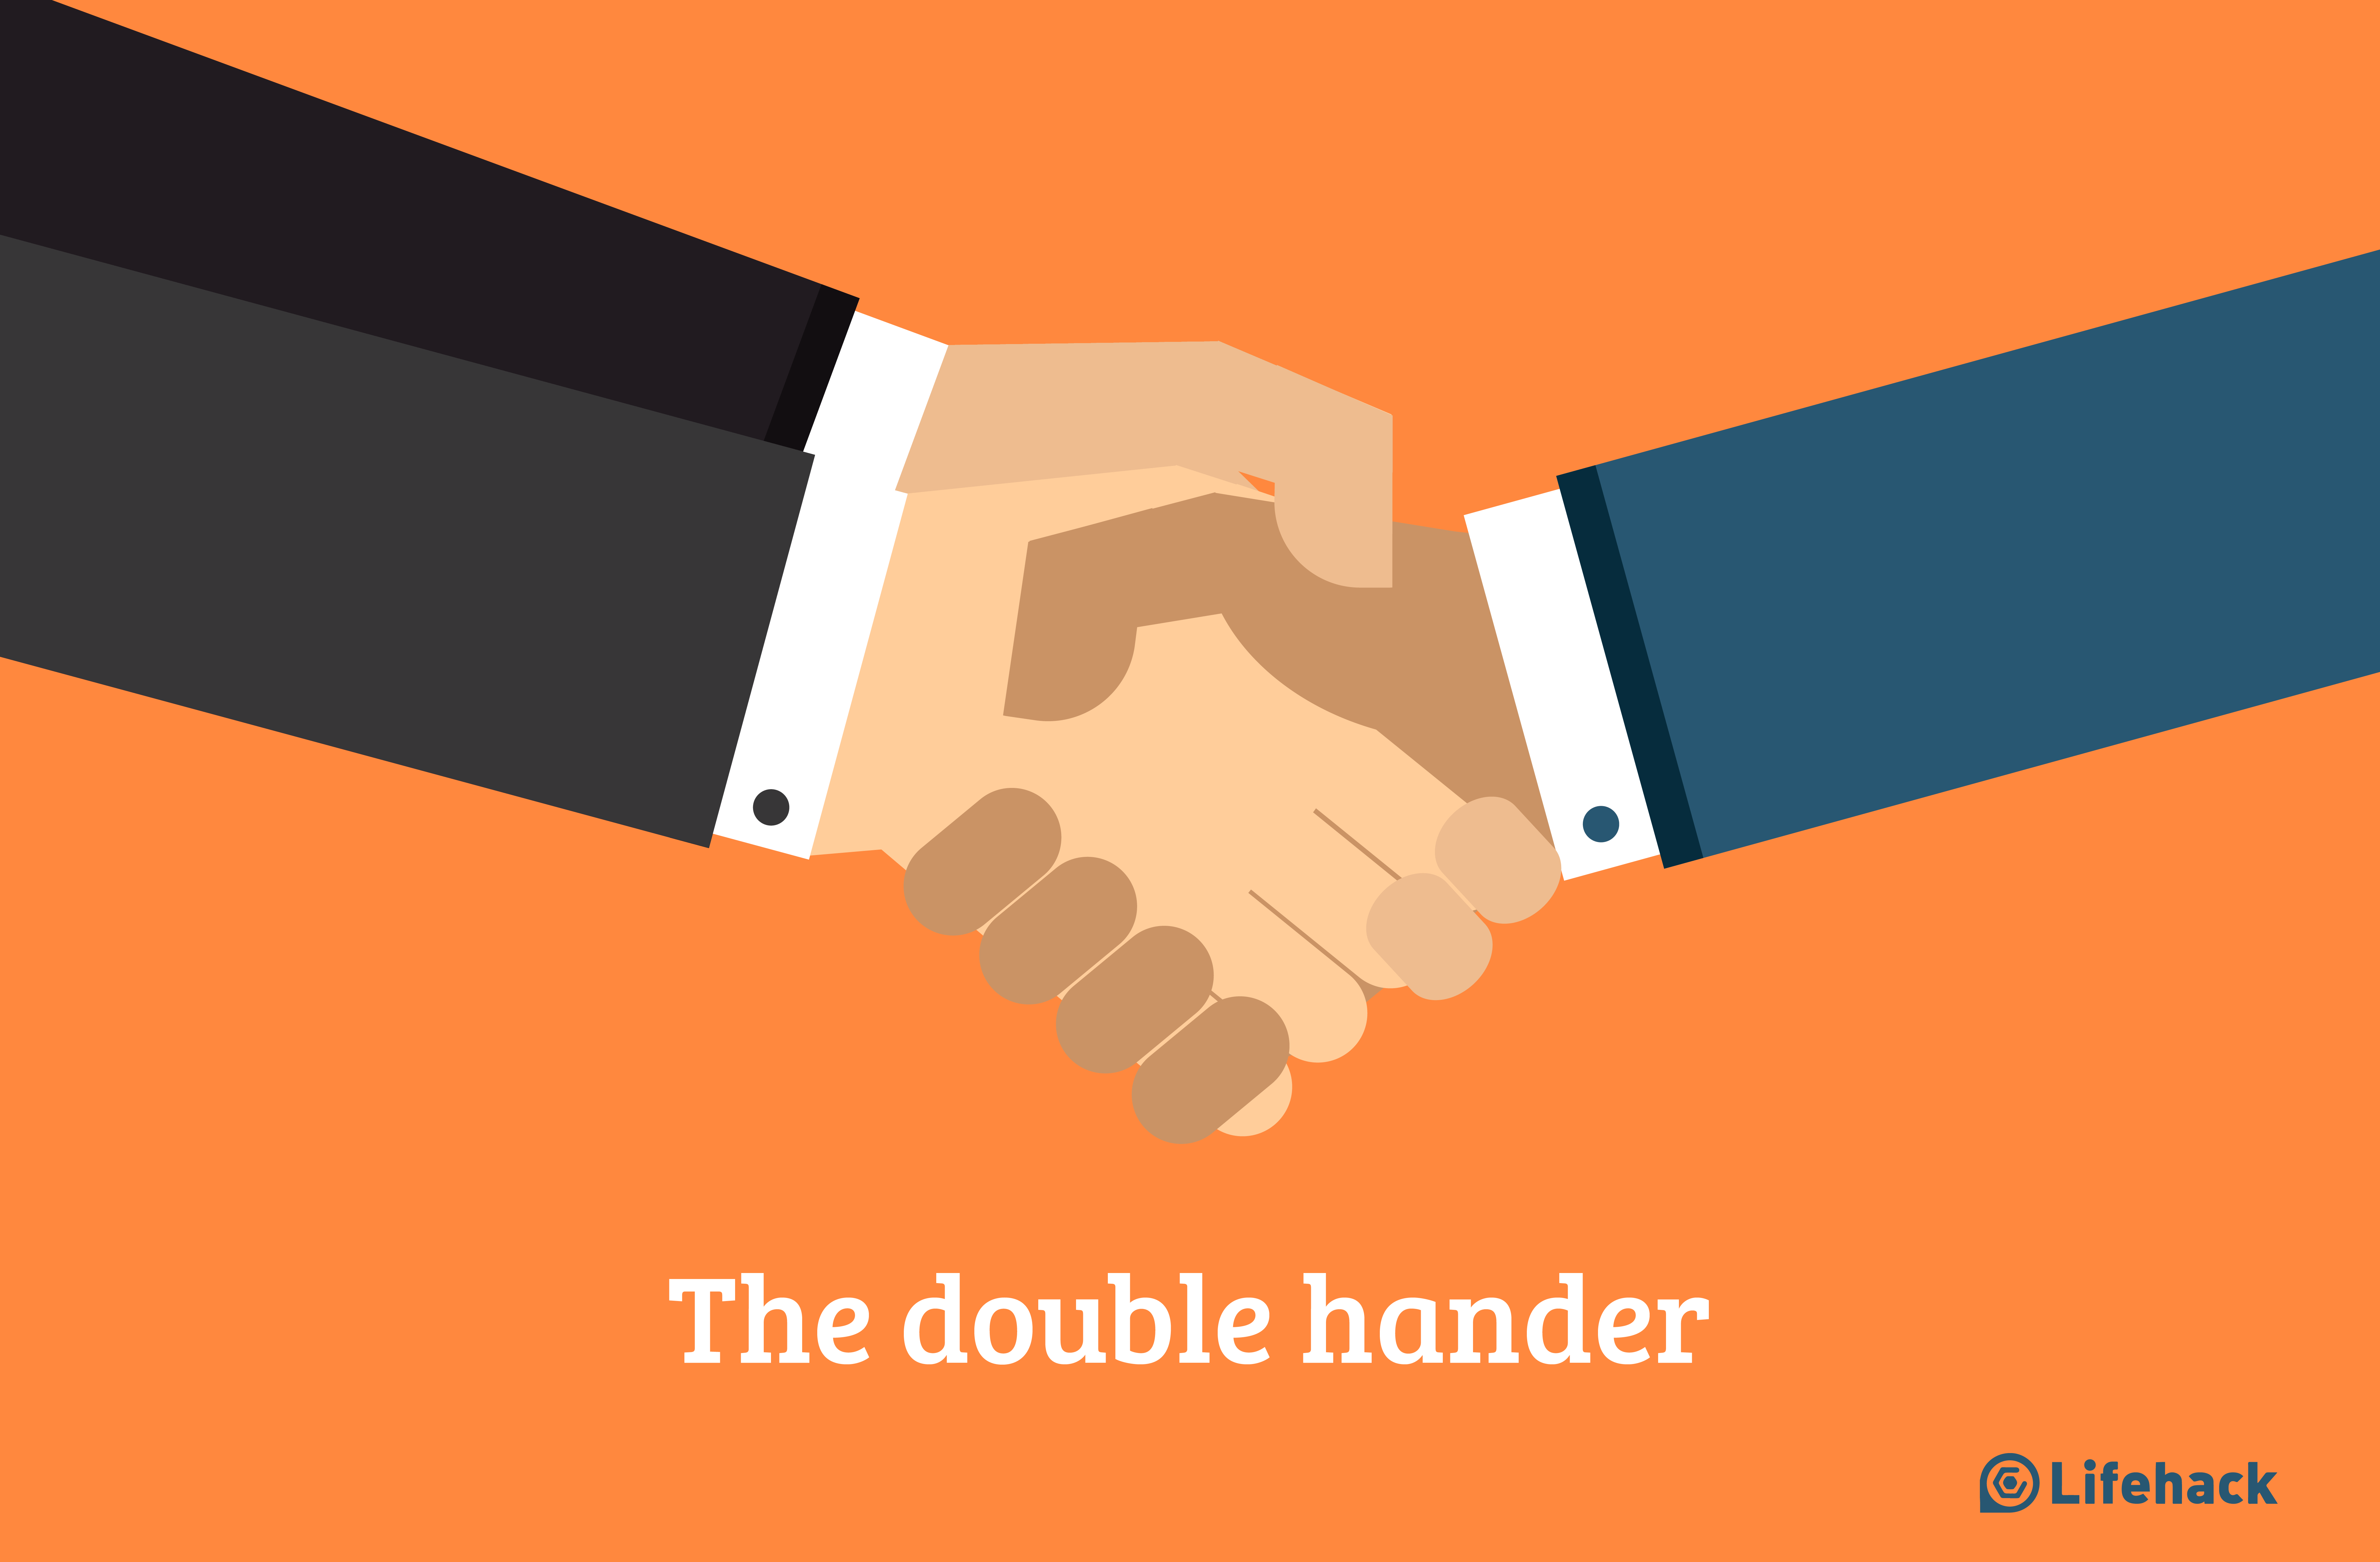 How to Deliver a Handshake That Makes People Remember You